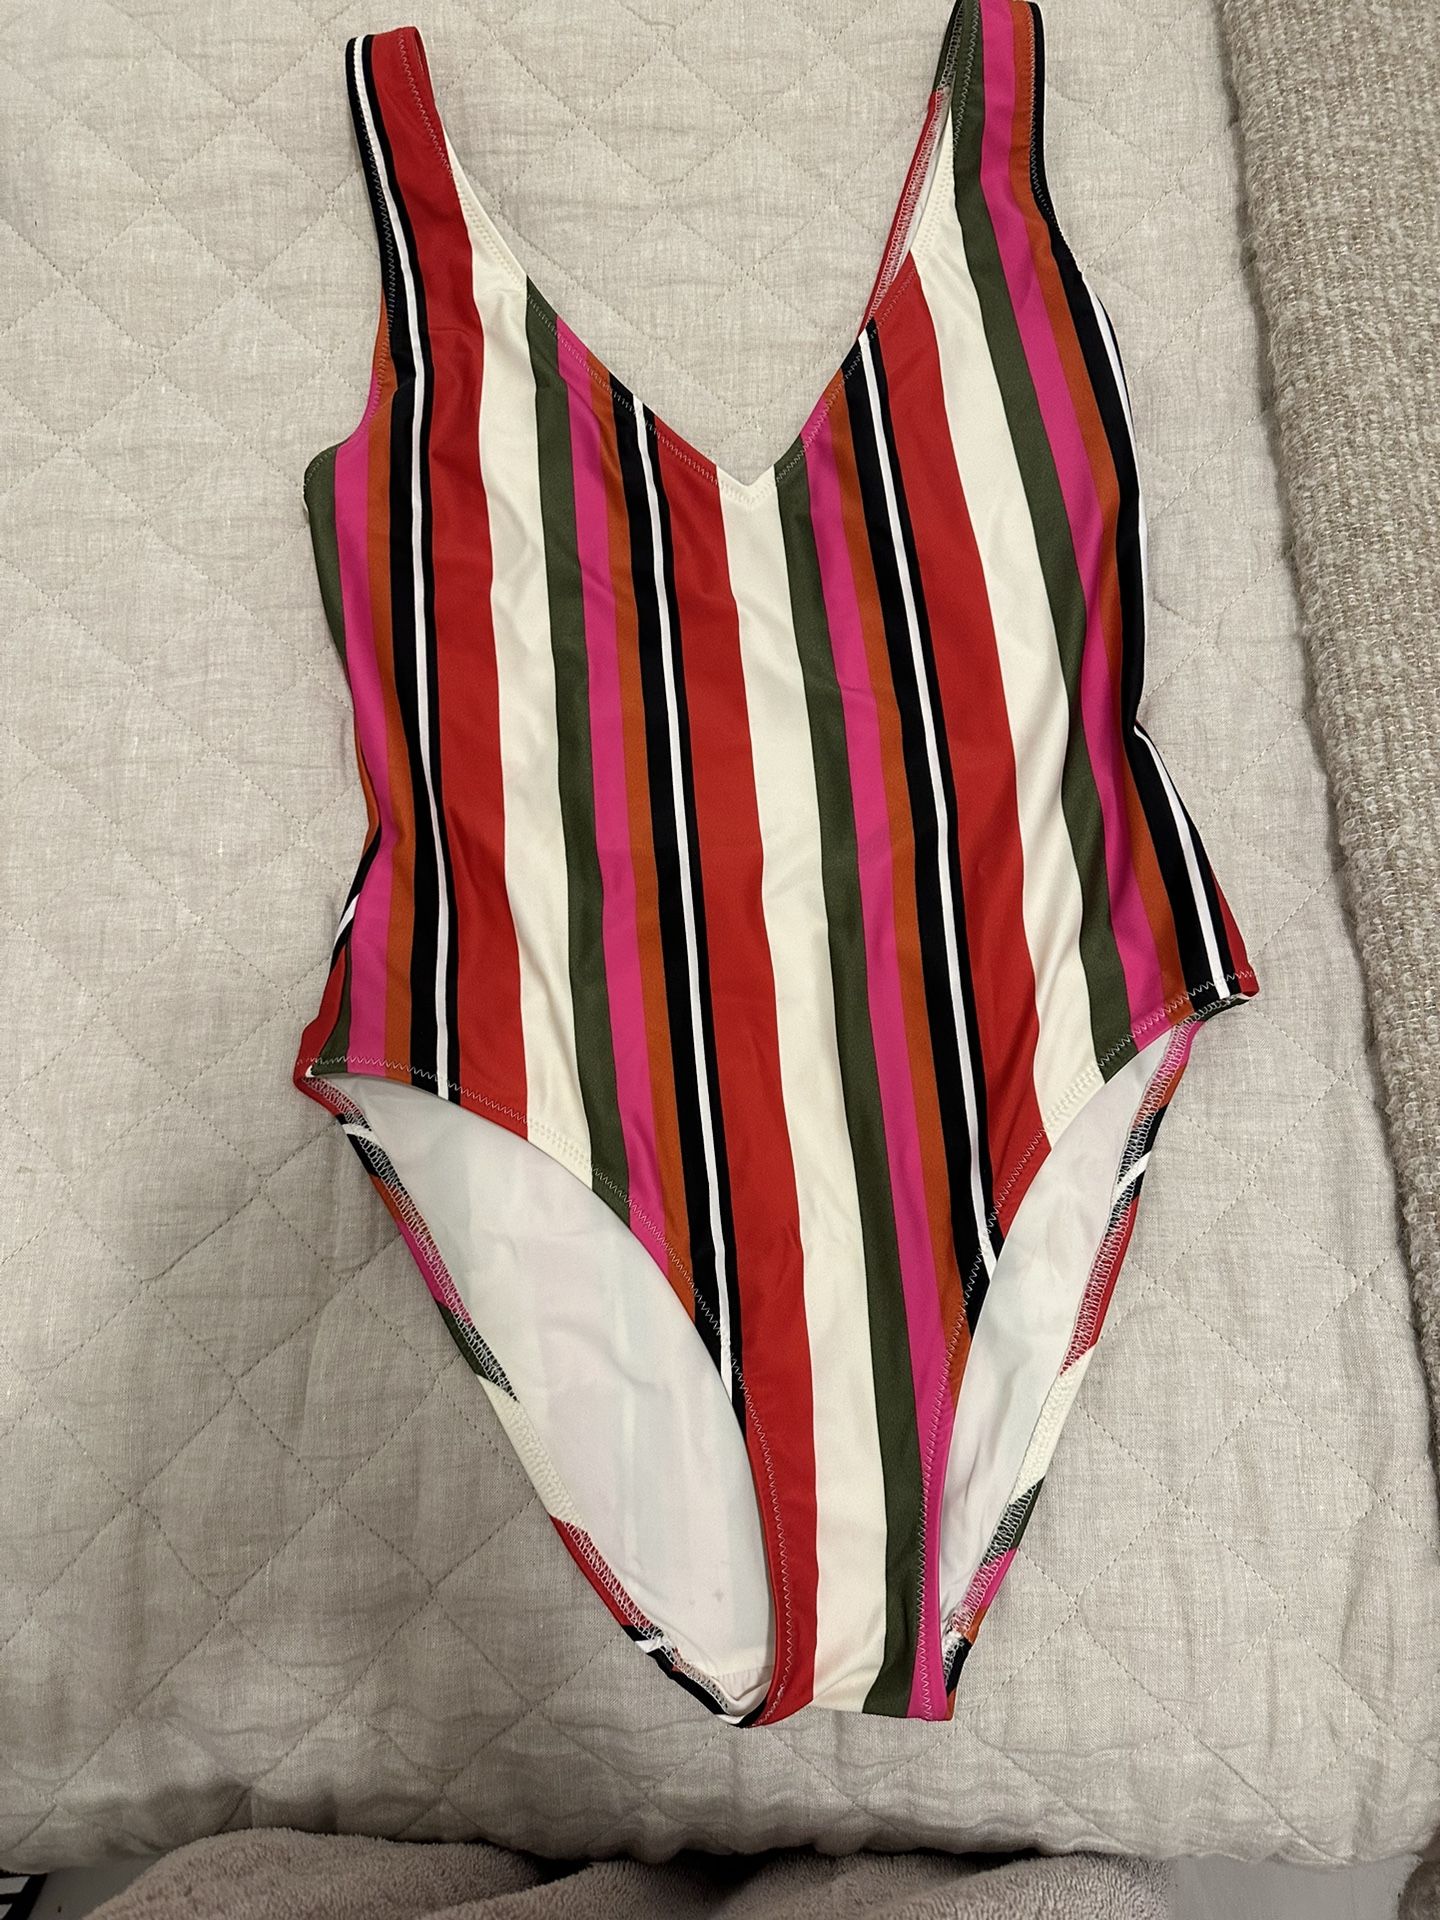 Gucci Bathing Suit for Sale in Houston, TX - OfferUp